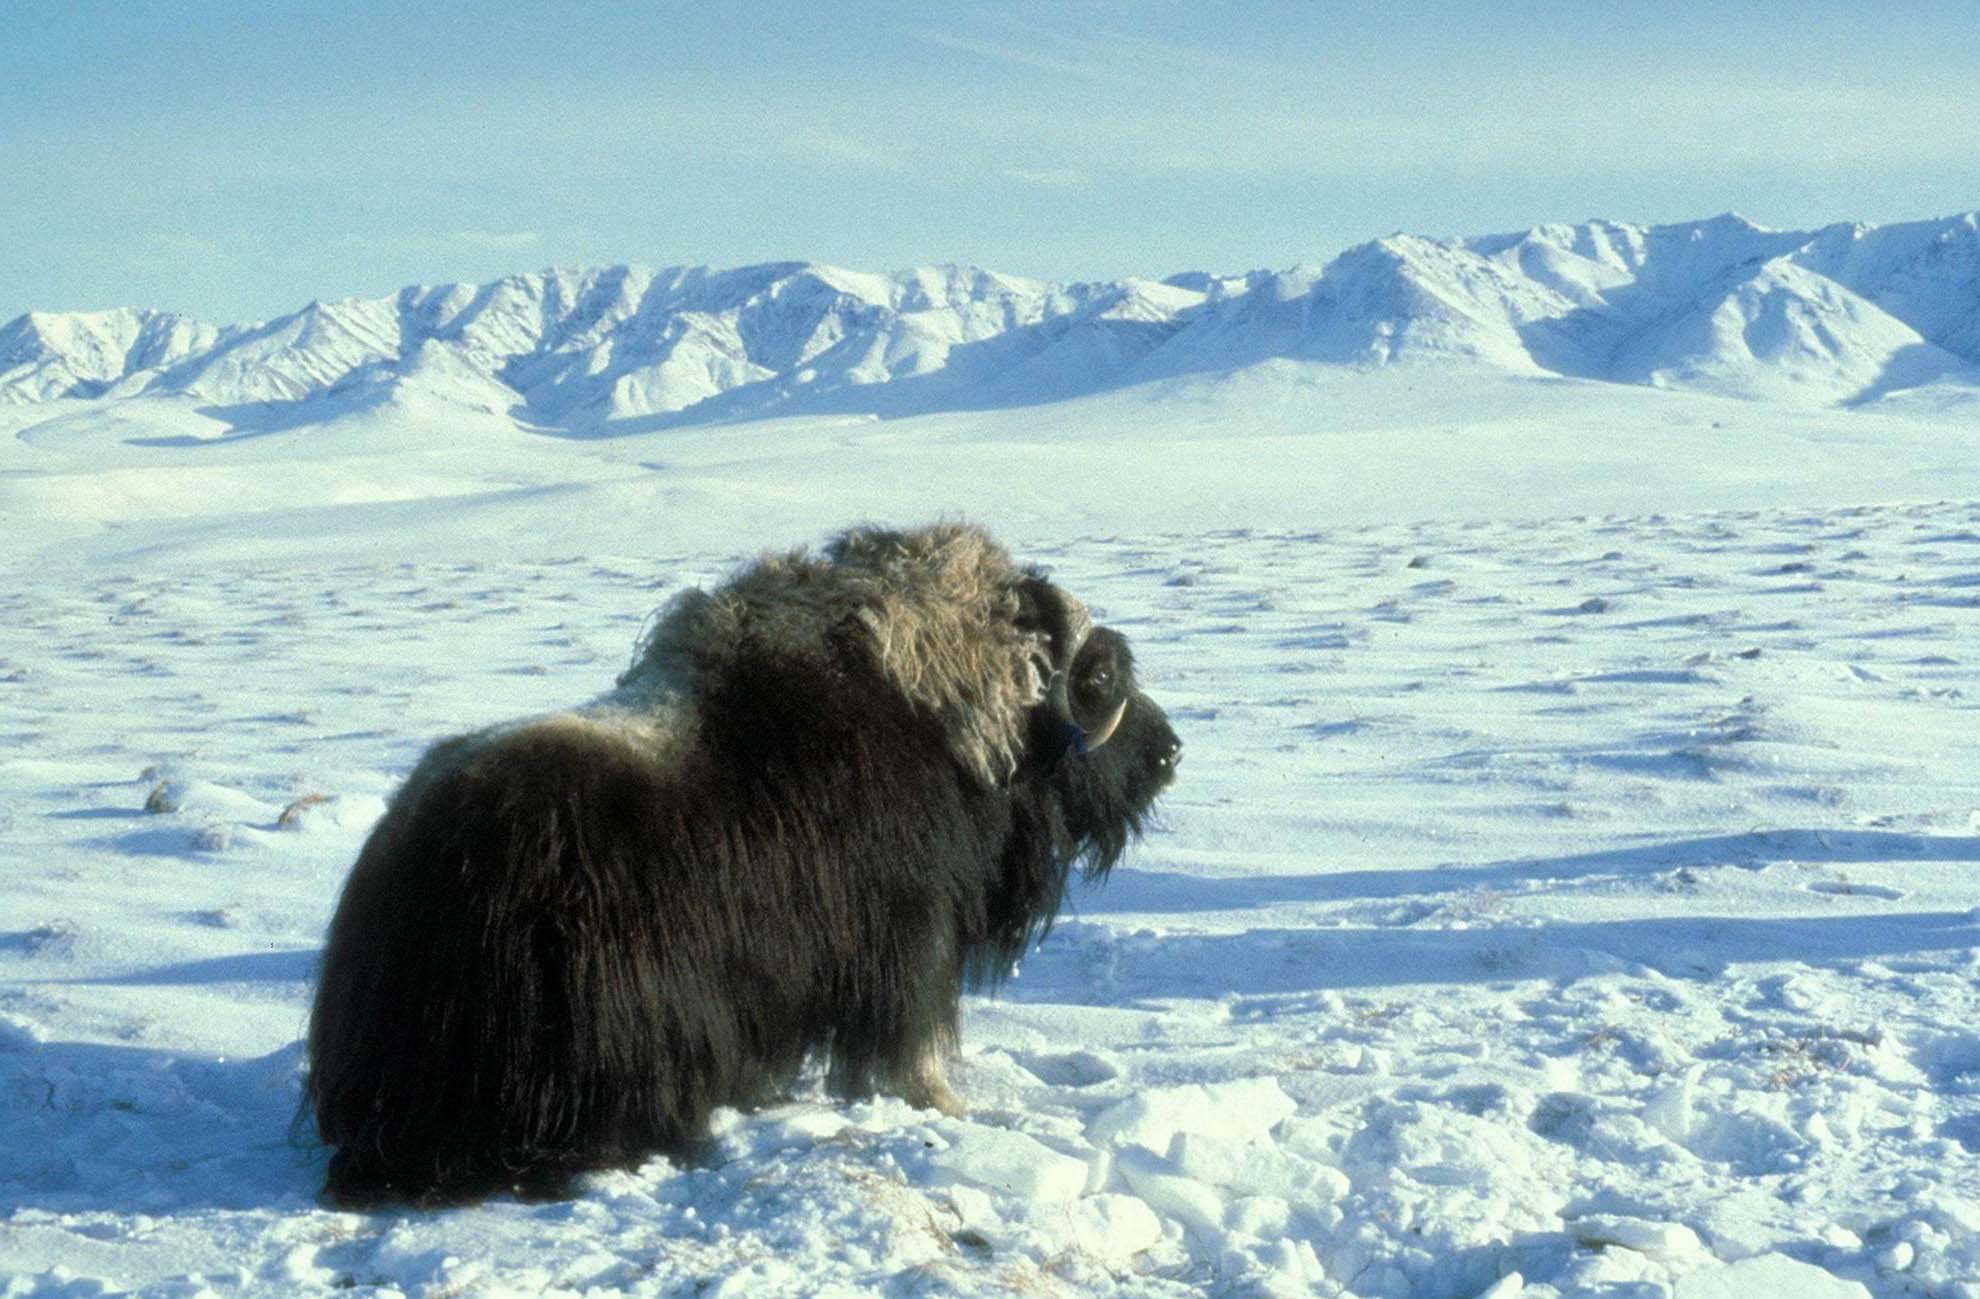 A musk ox, dark colored, looking towards the Alaskan mountains, in a white and snowy landscape.